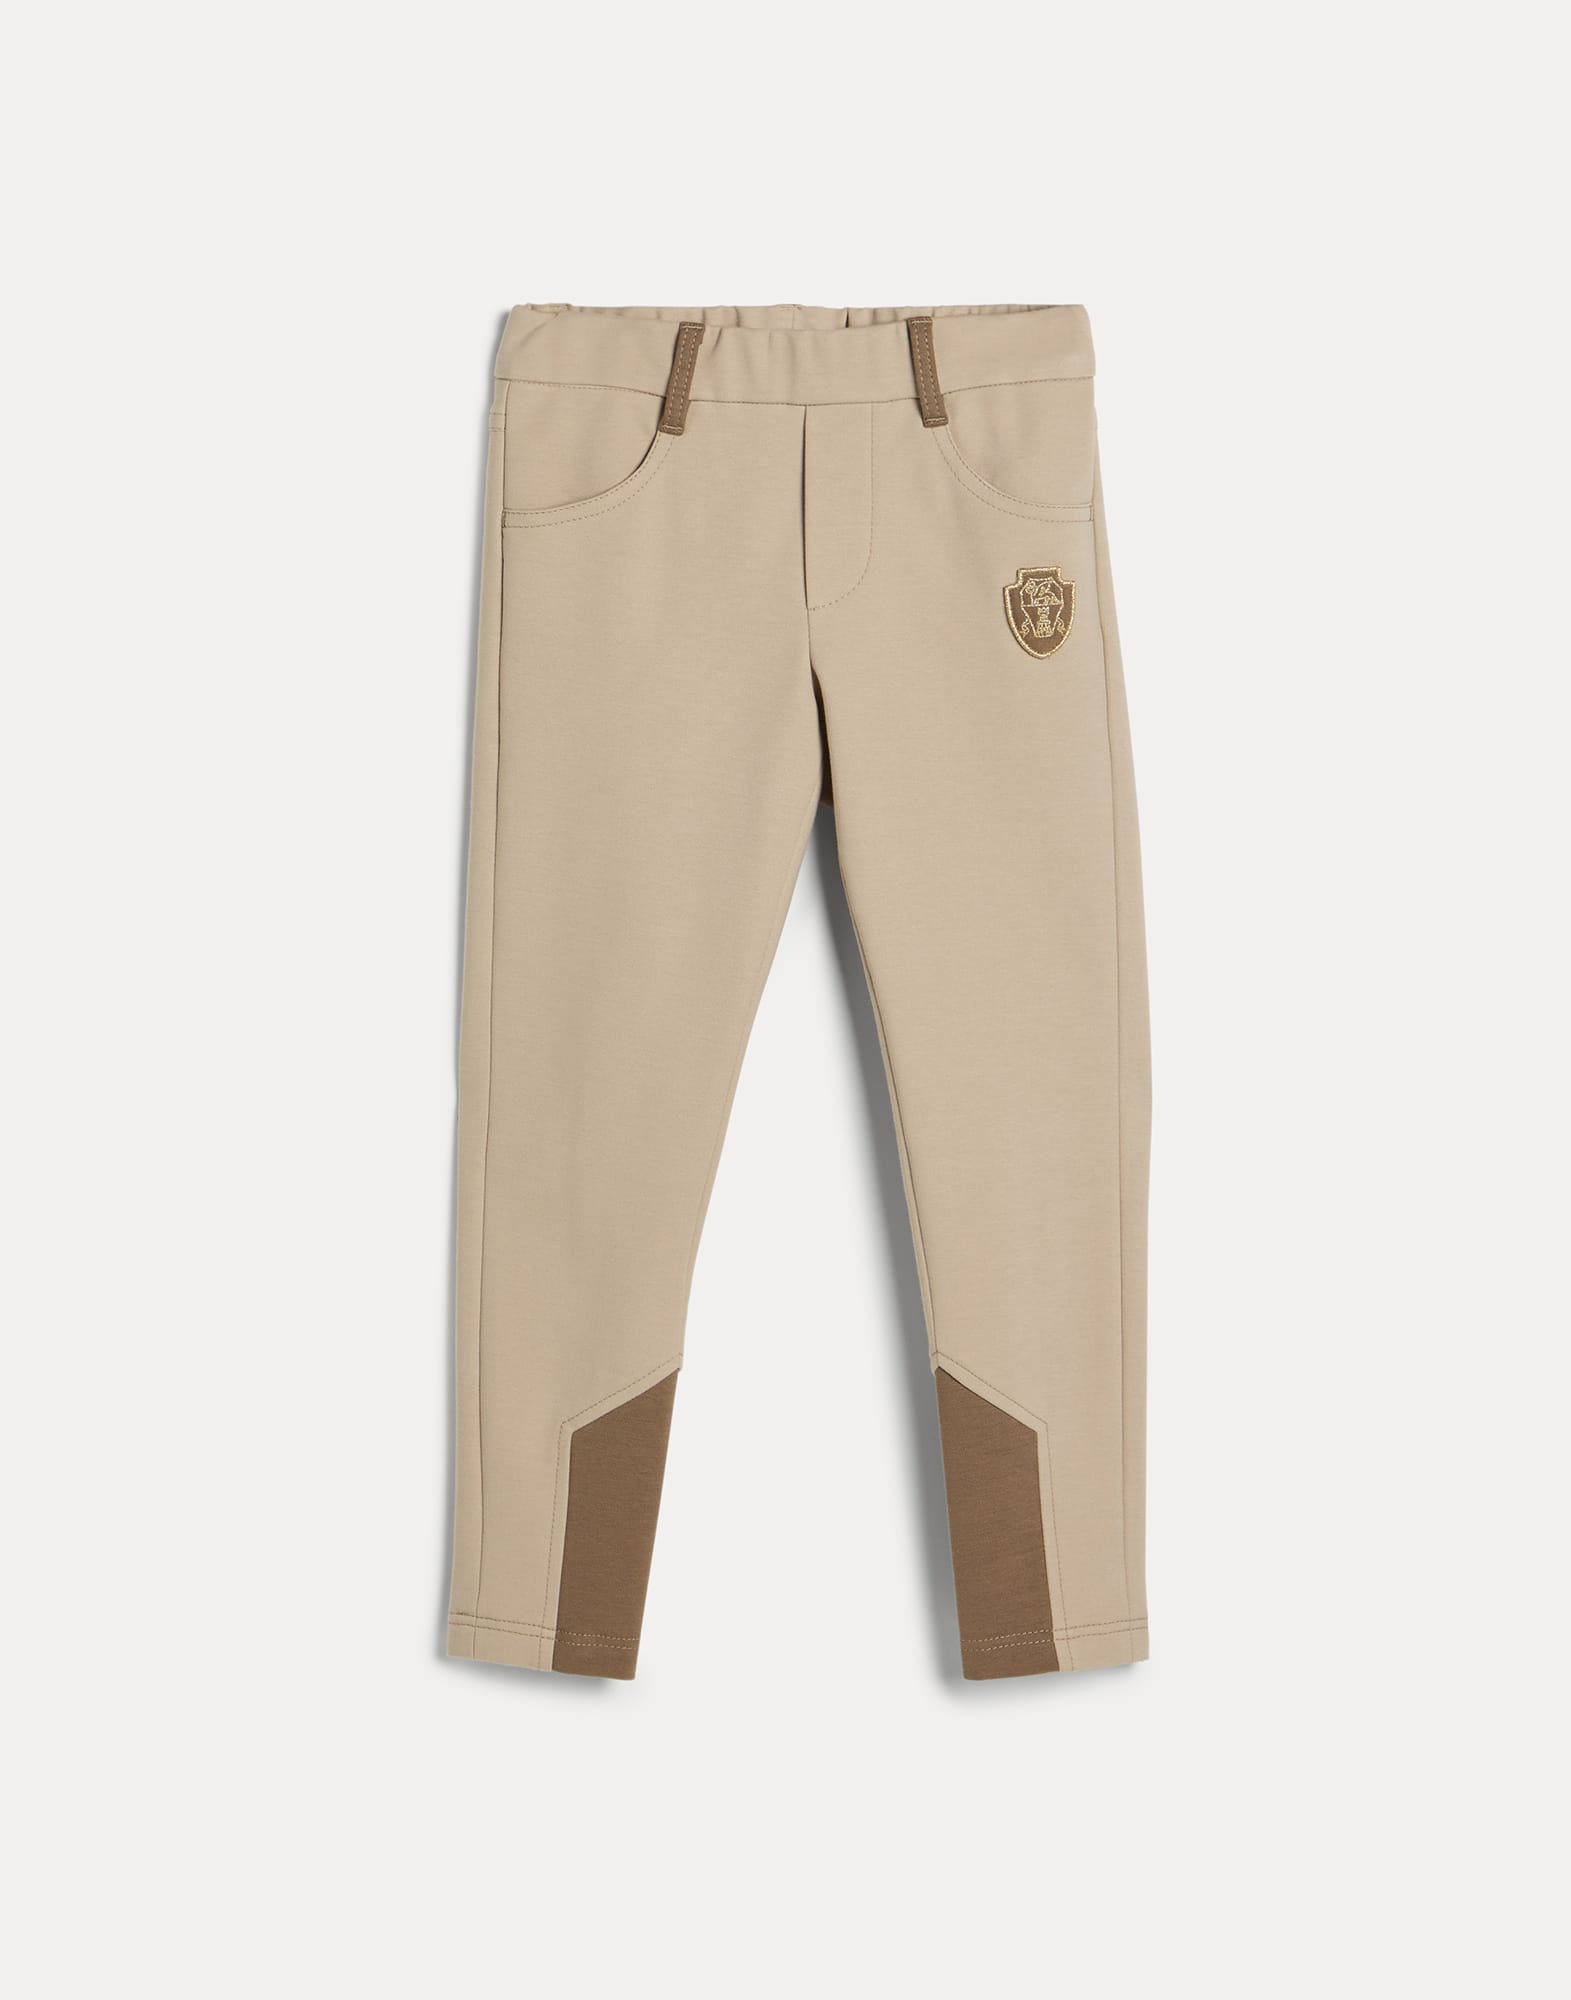 Equestrian trousers